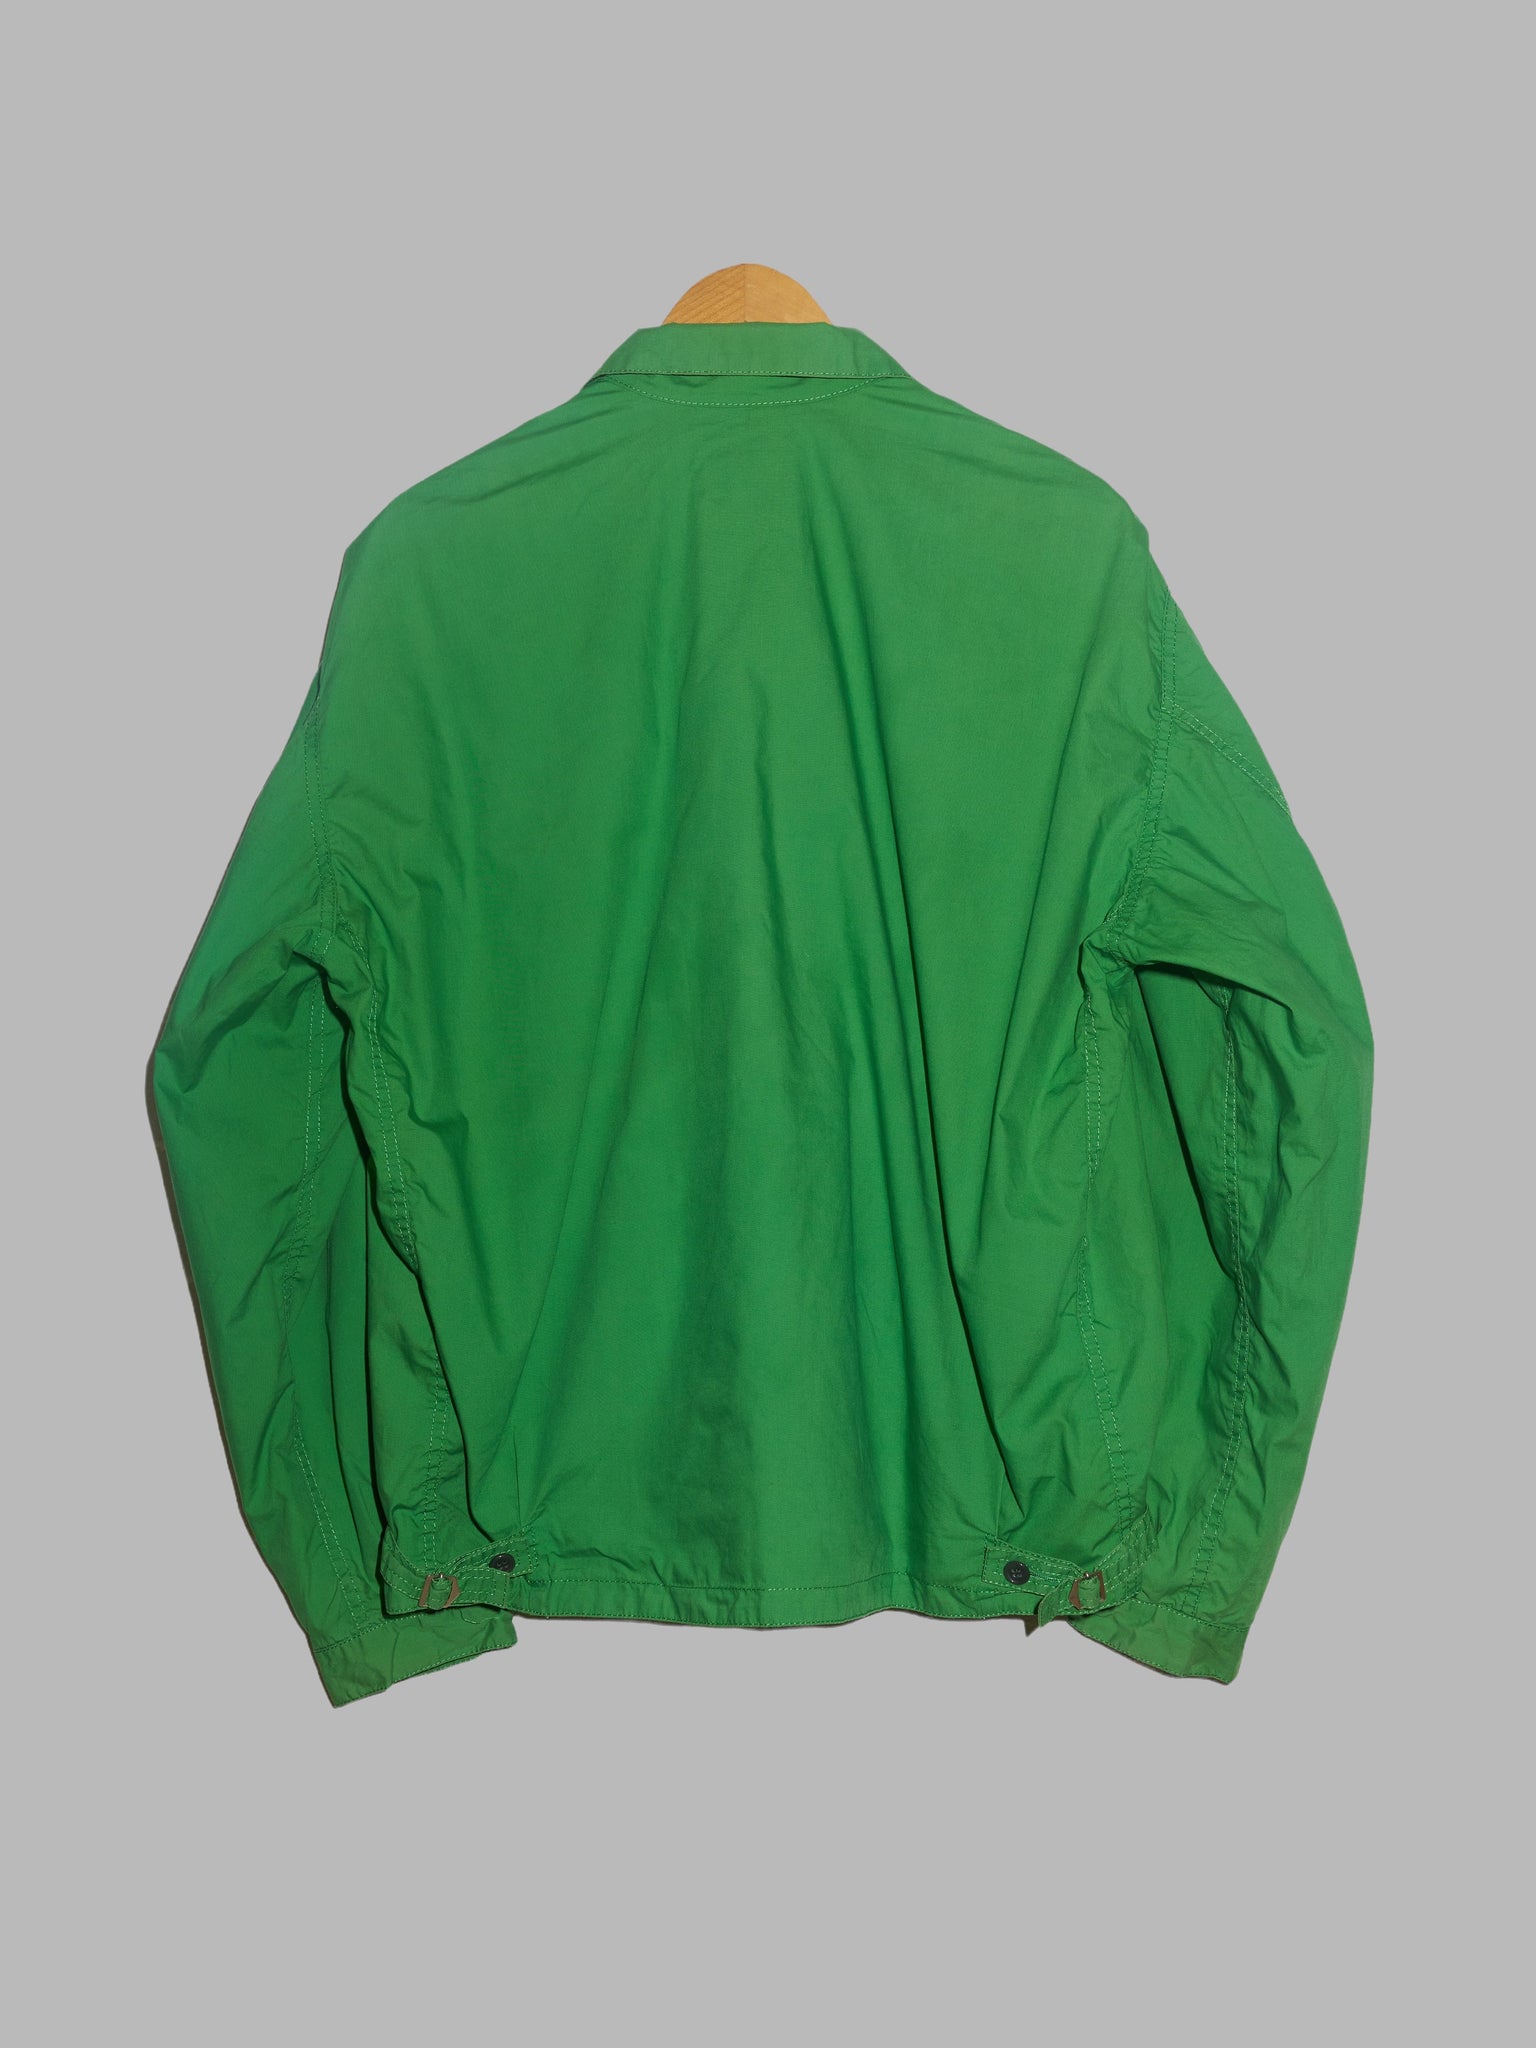 Nigel Cabourn 1990s green cotton double pocket bomber jacket